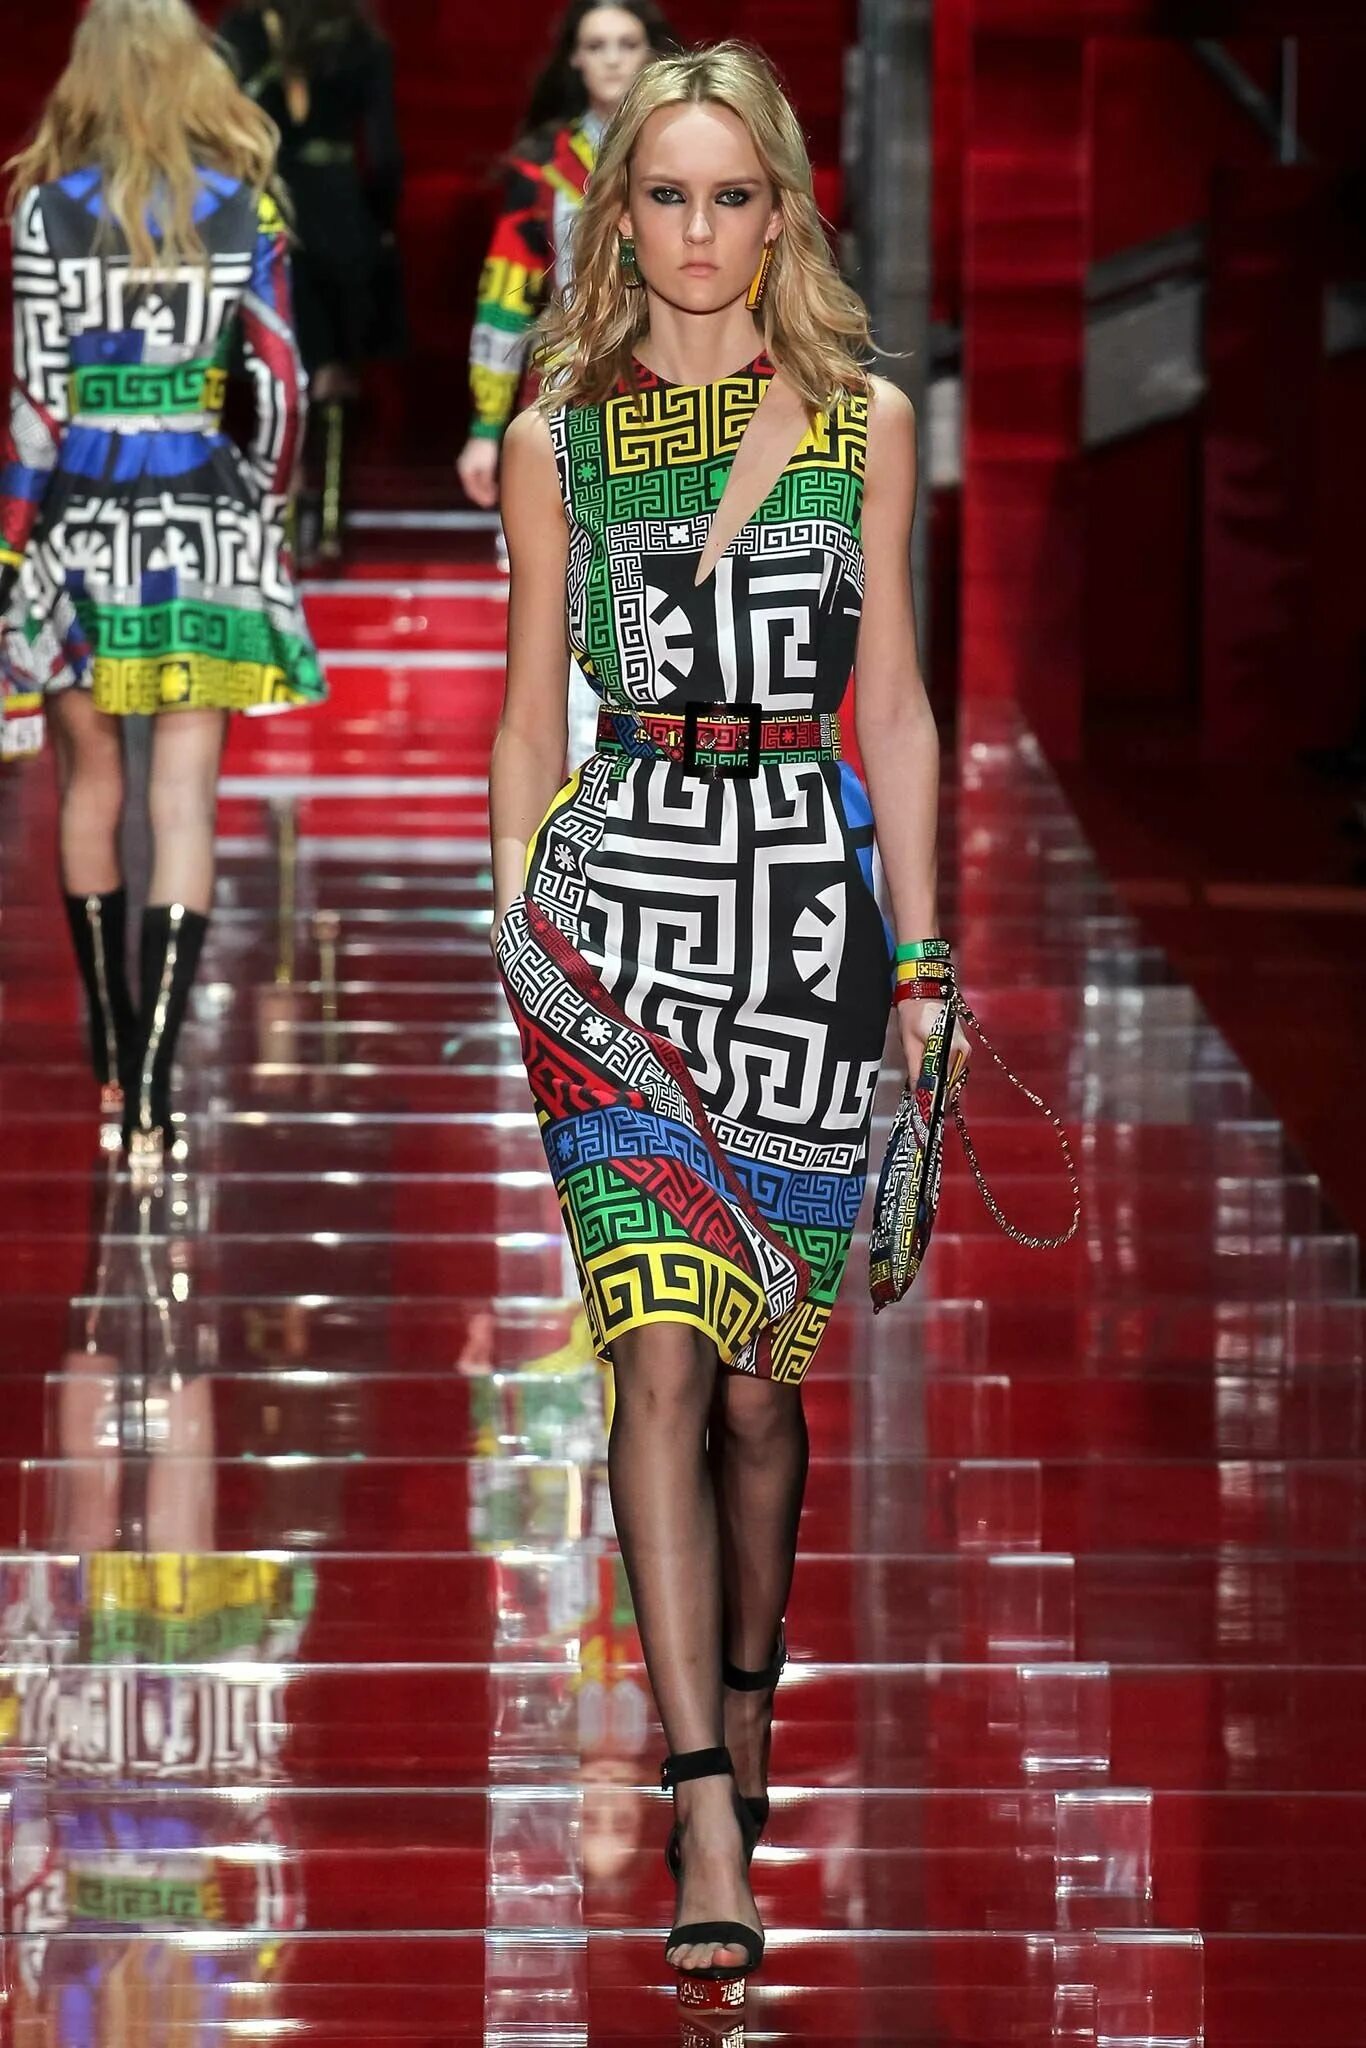 Versace collection. Донателла Версаче коллекции. Донателла Версаче мода. Коллекция Донателлы Версаче 2018. Коллекция одежды Донателла Версаче.